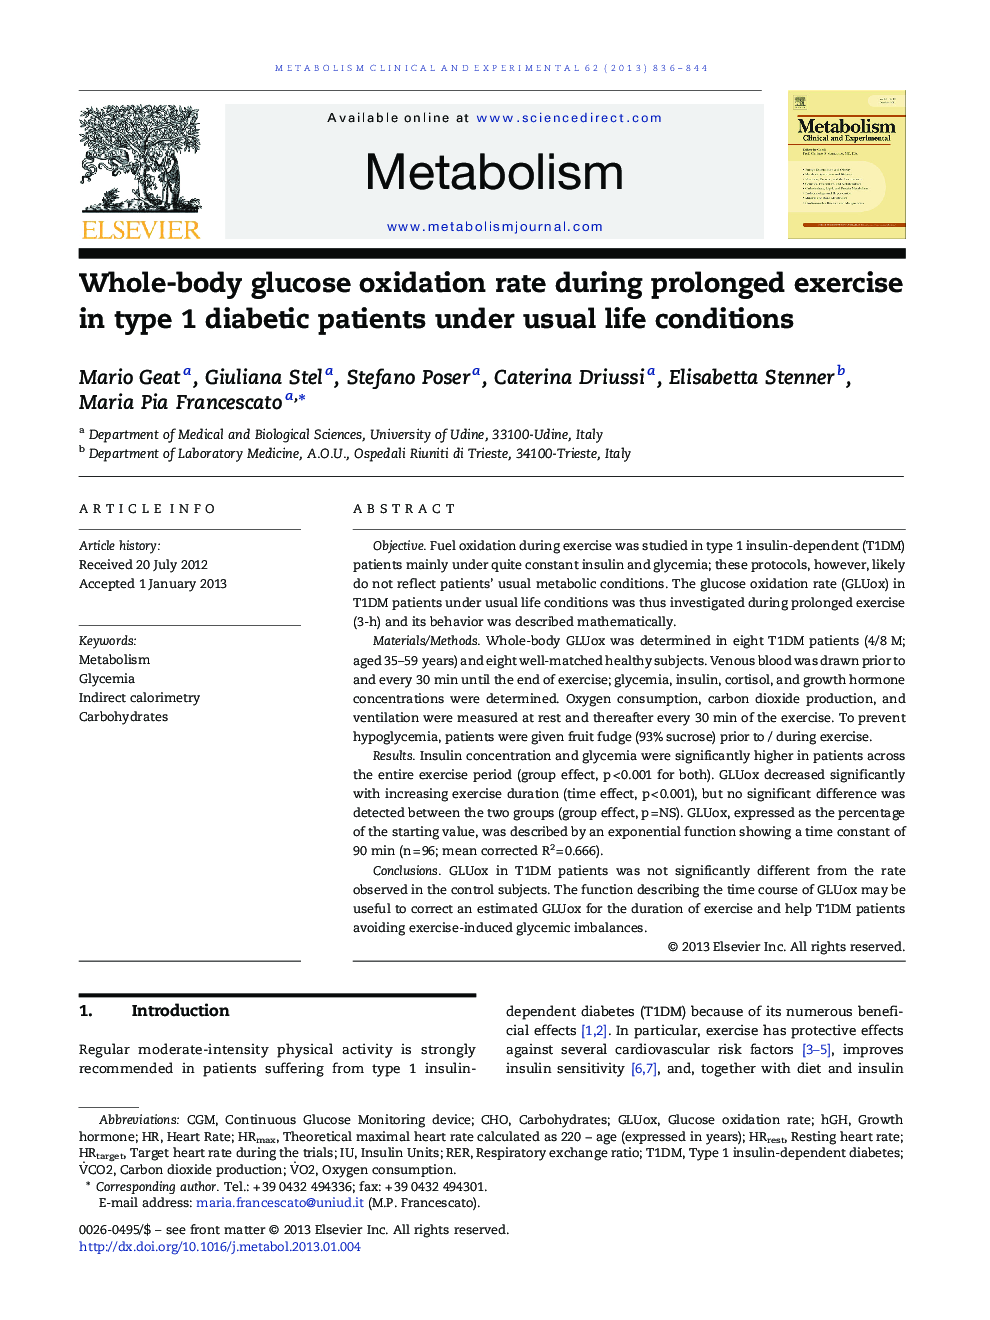 Whole-body glucose oxidation rate during prolonged exercise in type 1 diabetic patients under usual life conditions